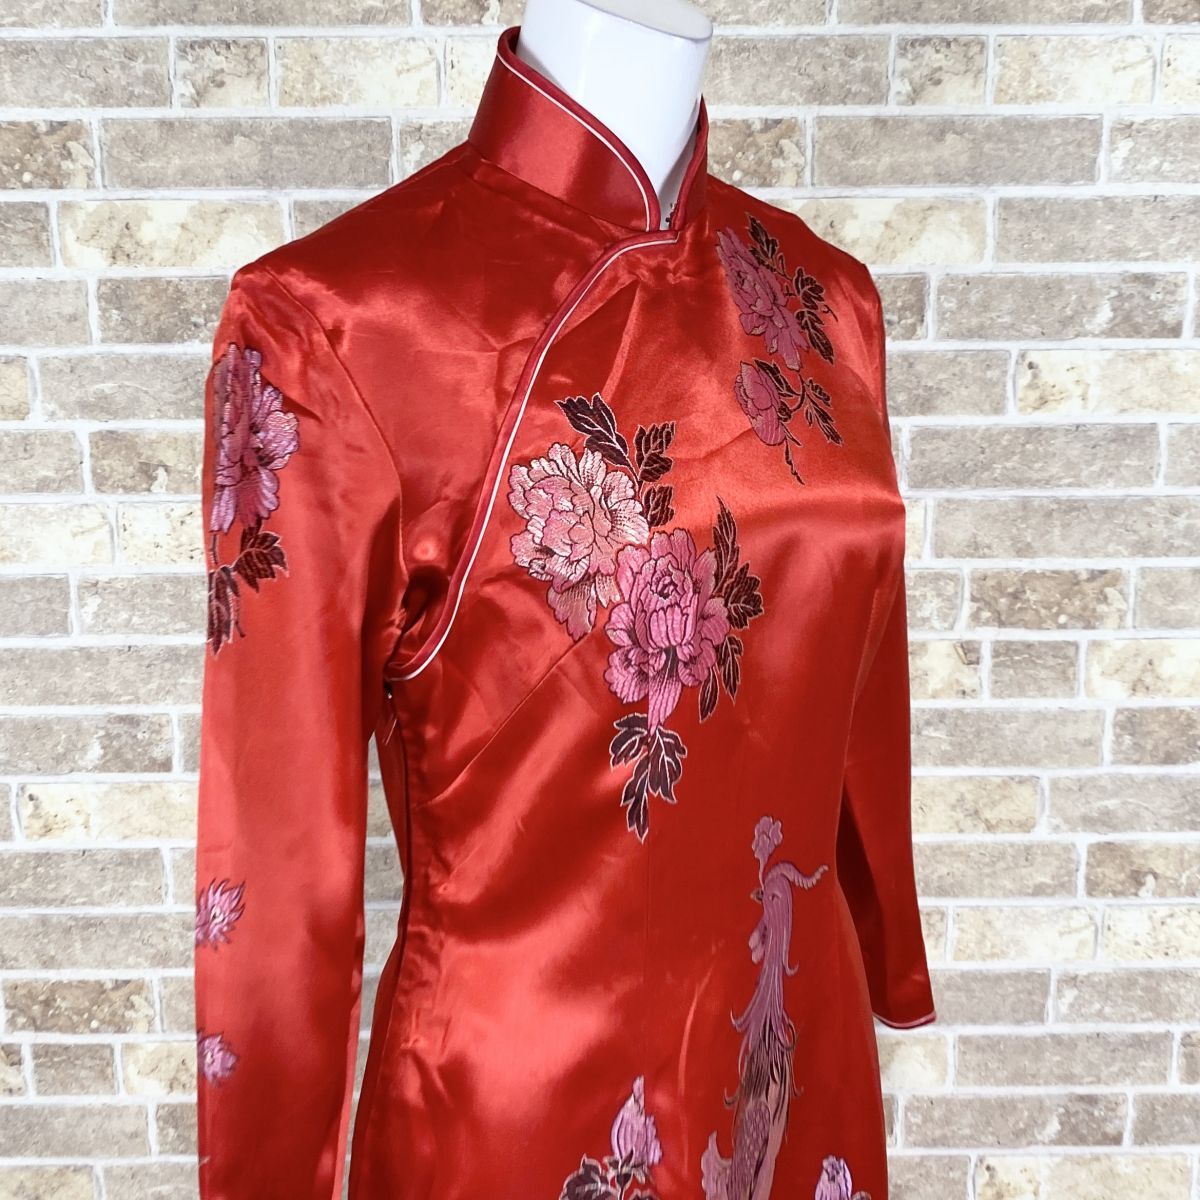 1 jpy China dress dragon . middle type clothes equipment quotient shop manager sleeve long One-piece red color dress kyabadore presentation formal used 4731